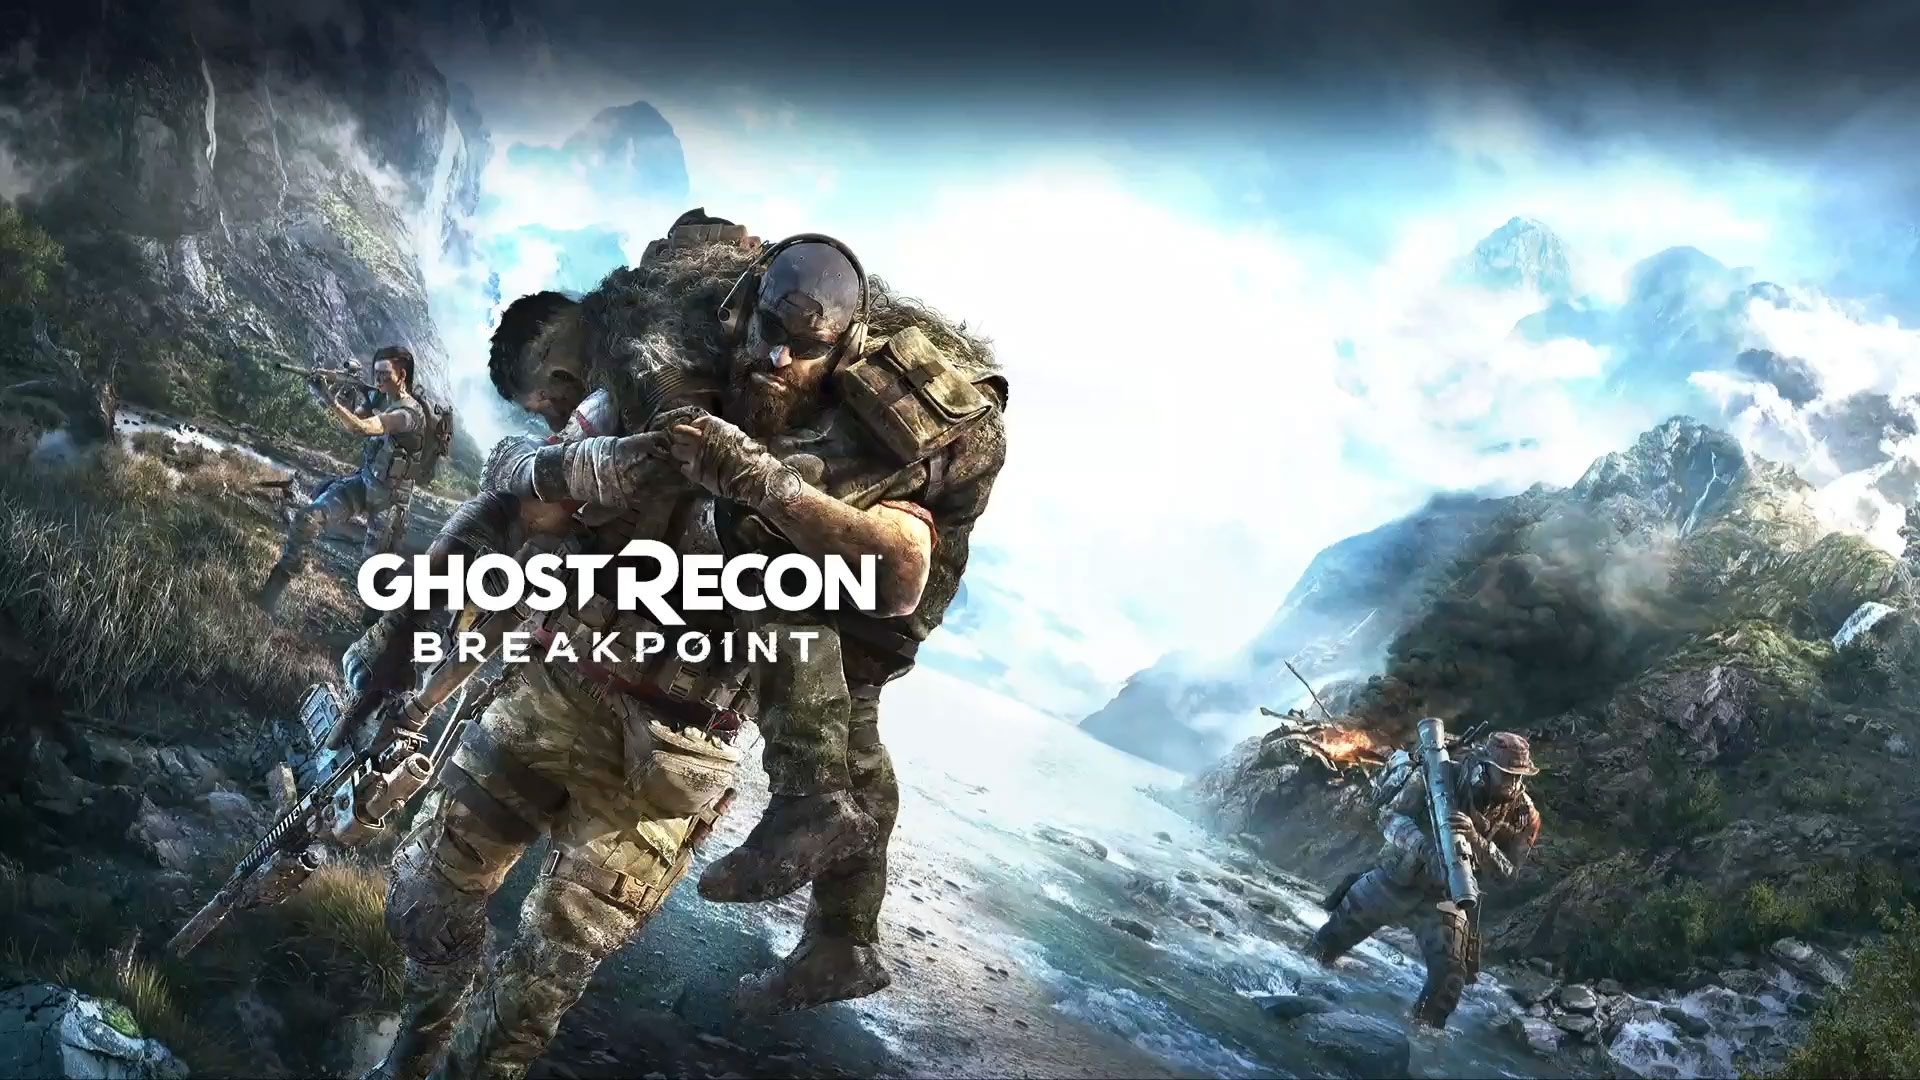 Overlord 3 1 ghost recon breakpoint